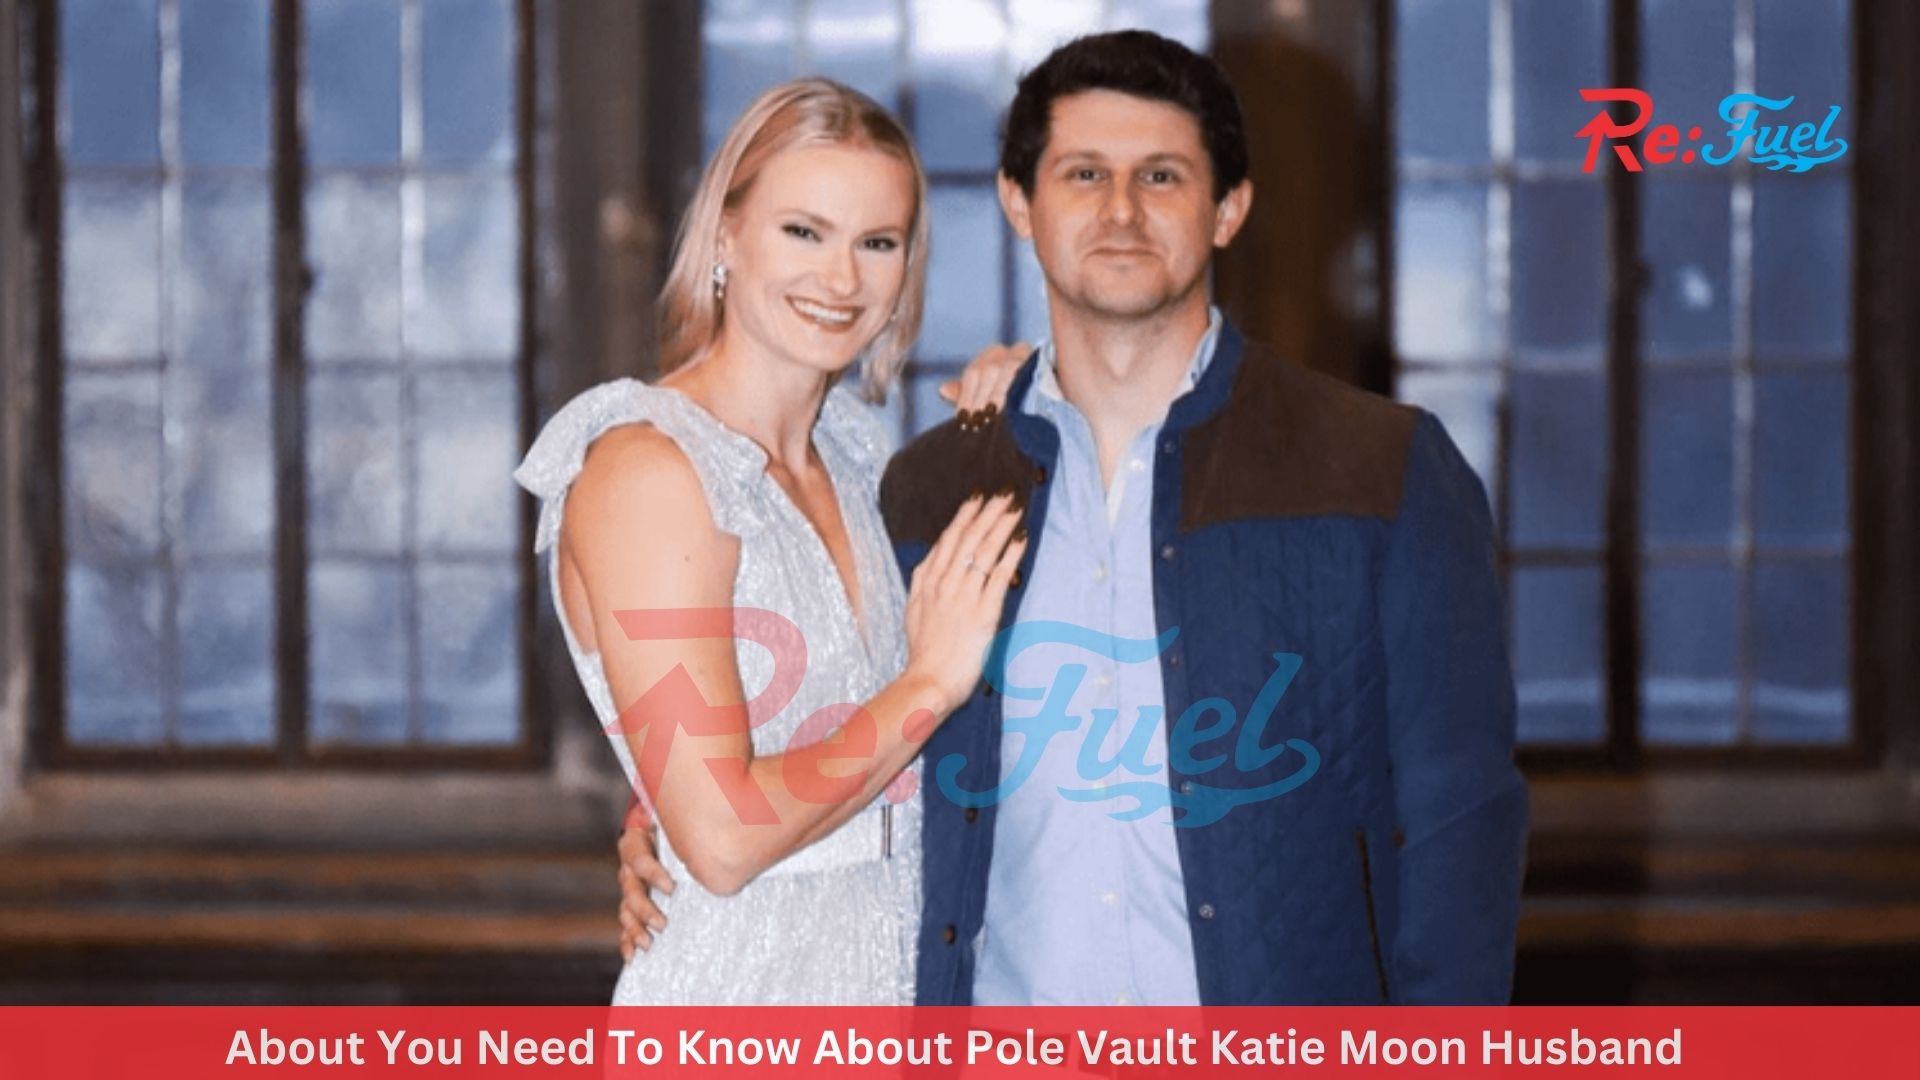 About You Need To Know About Pole Vault Katie Moon Husband